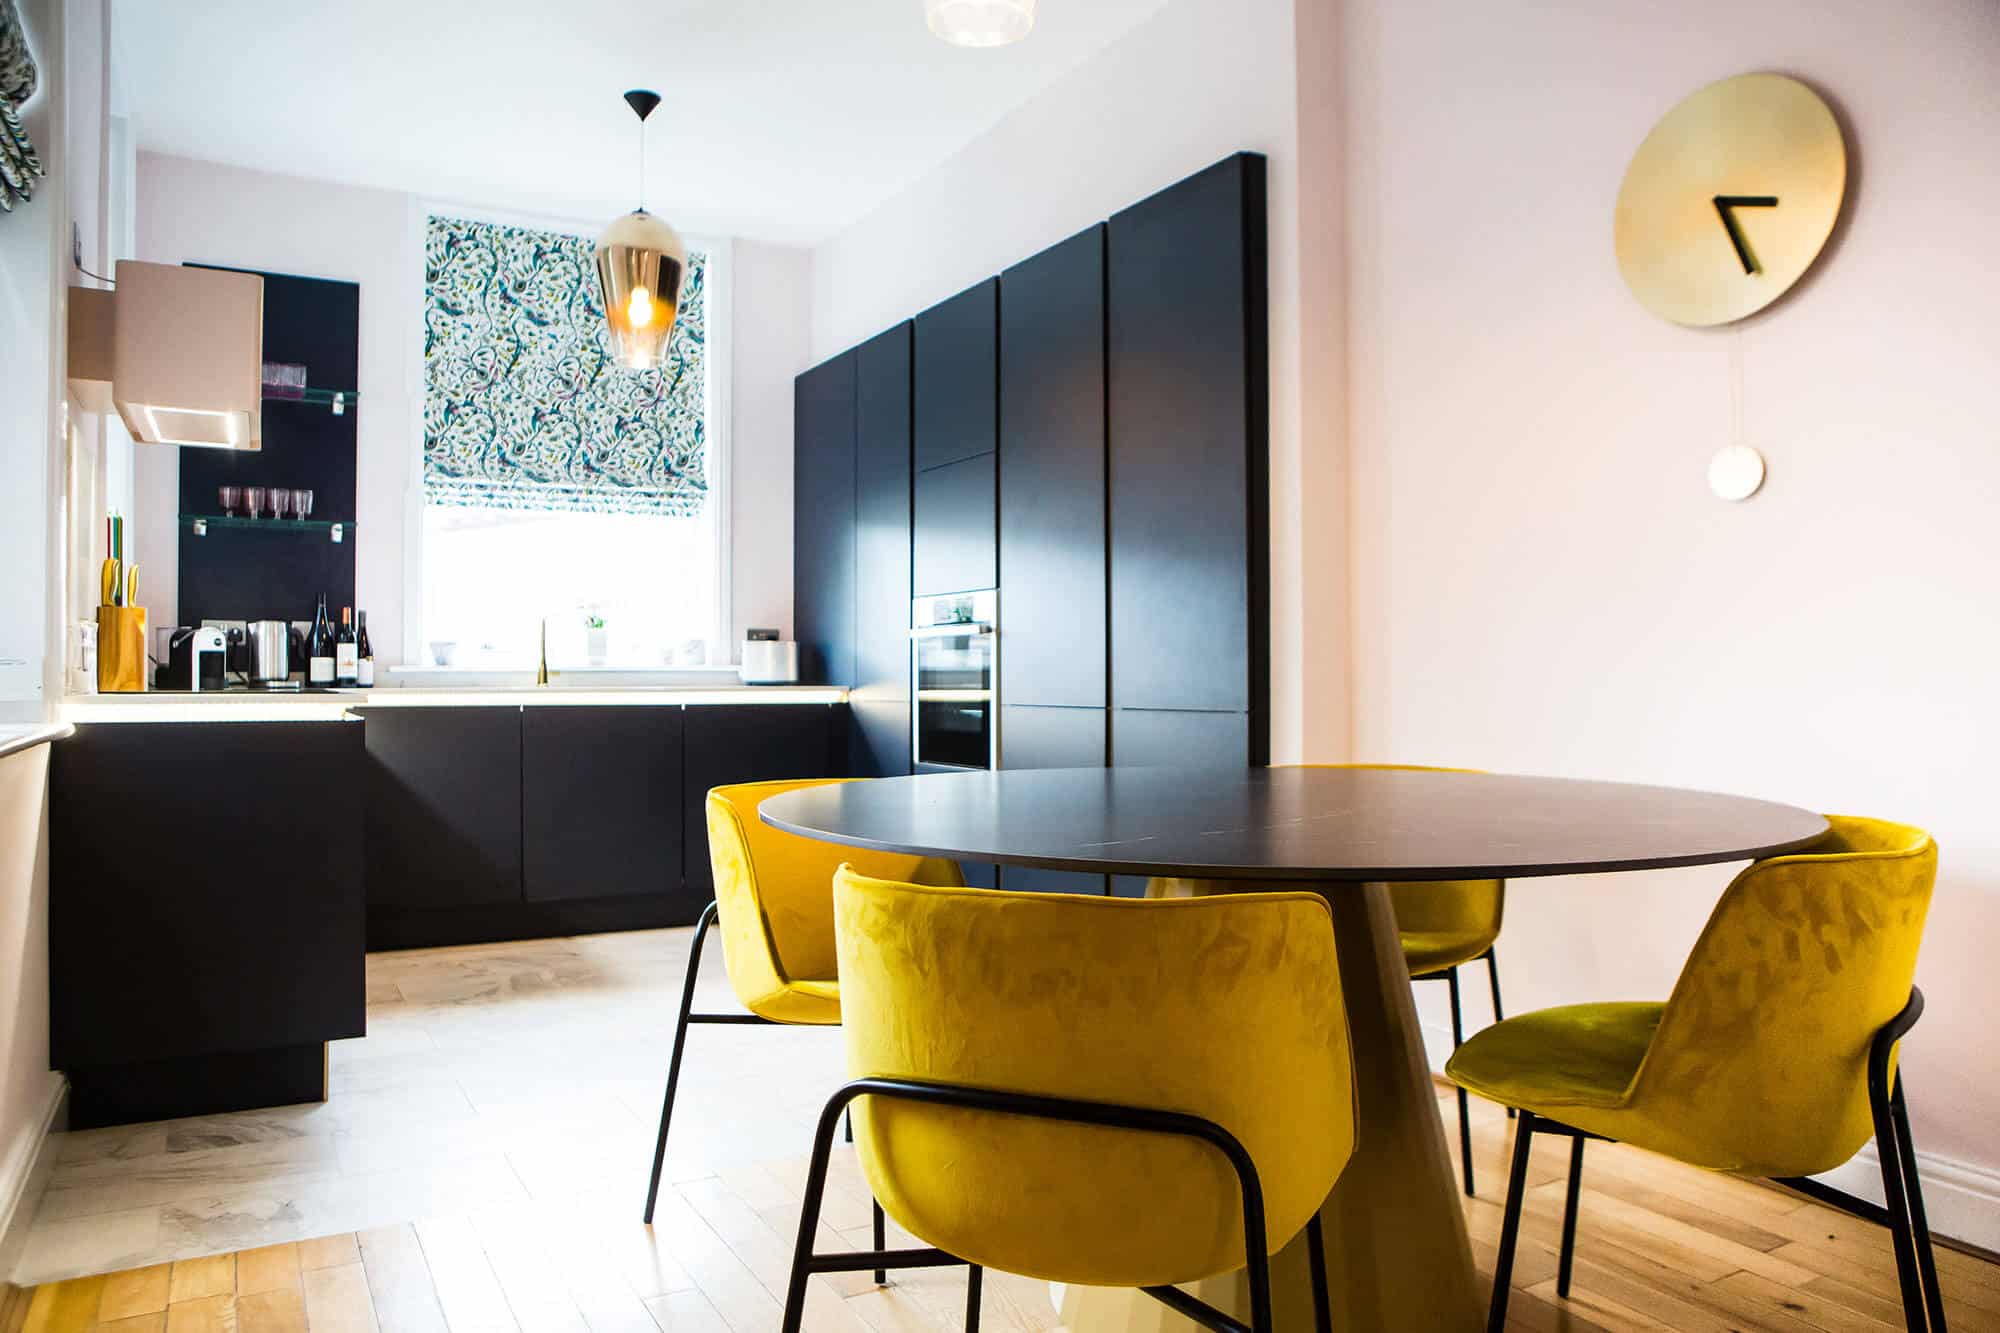 Guesty was the perfect solution for this ambitious young property management company